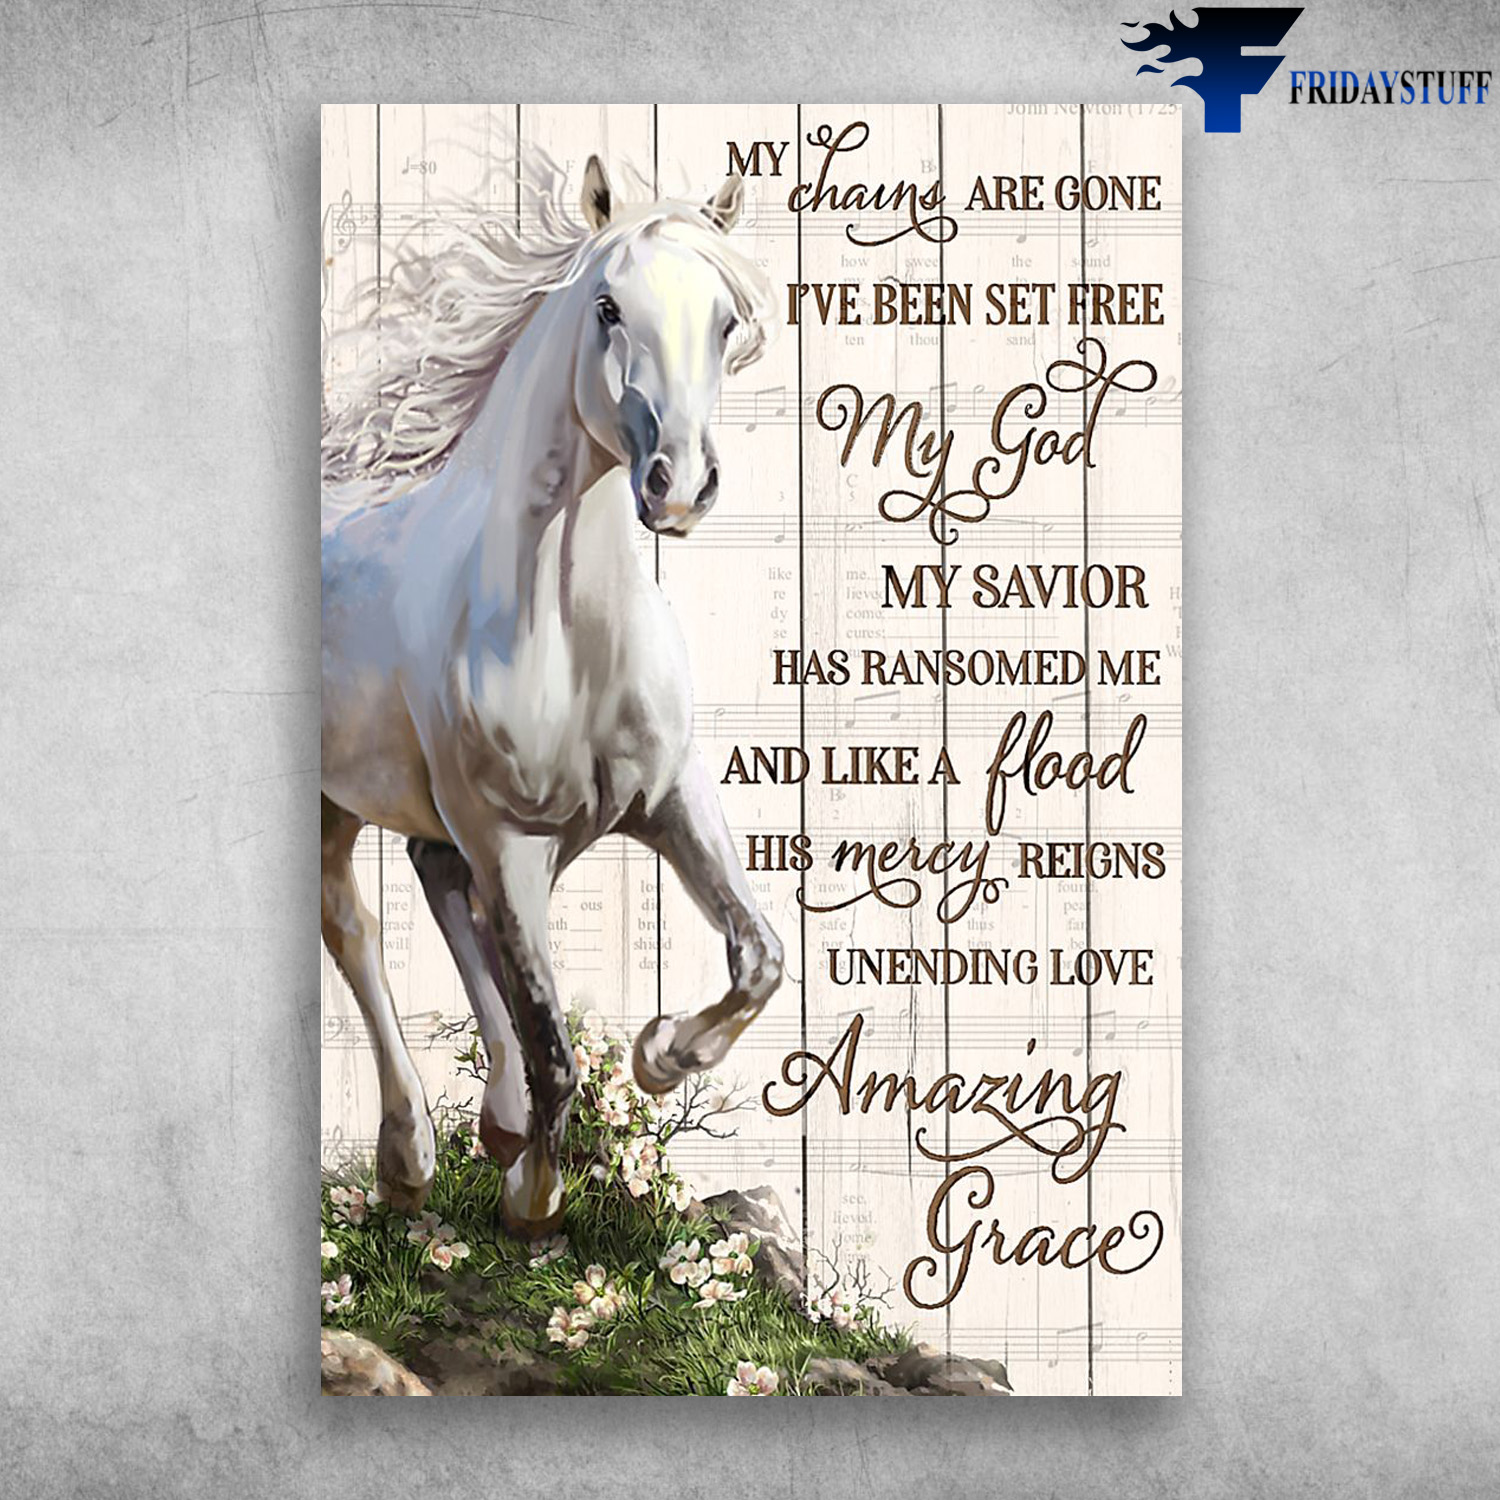 The White Horse - My Chains Are Gone, I've Been Set Free My God, my Savior has ransomed me, And like a flood His mercy reigns, Unending love, Amazing grace